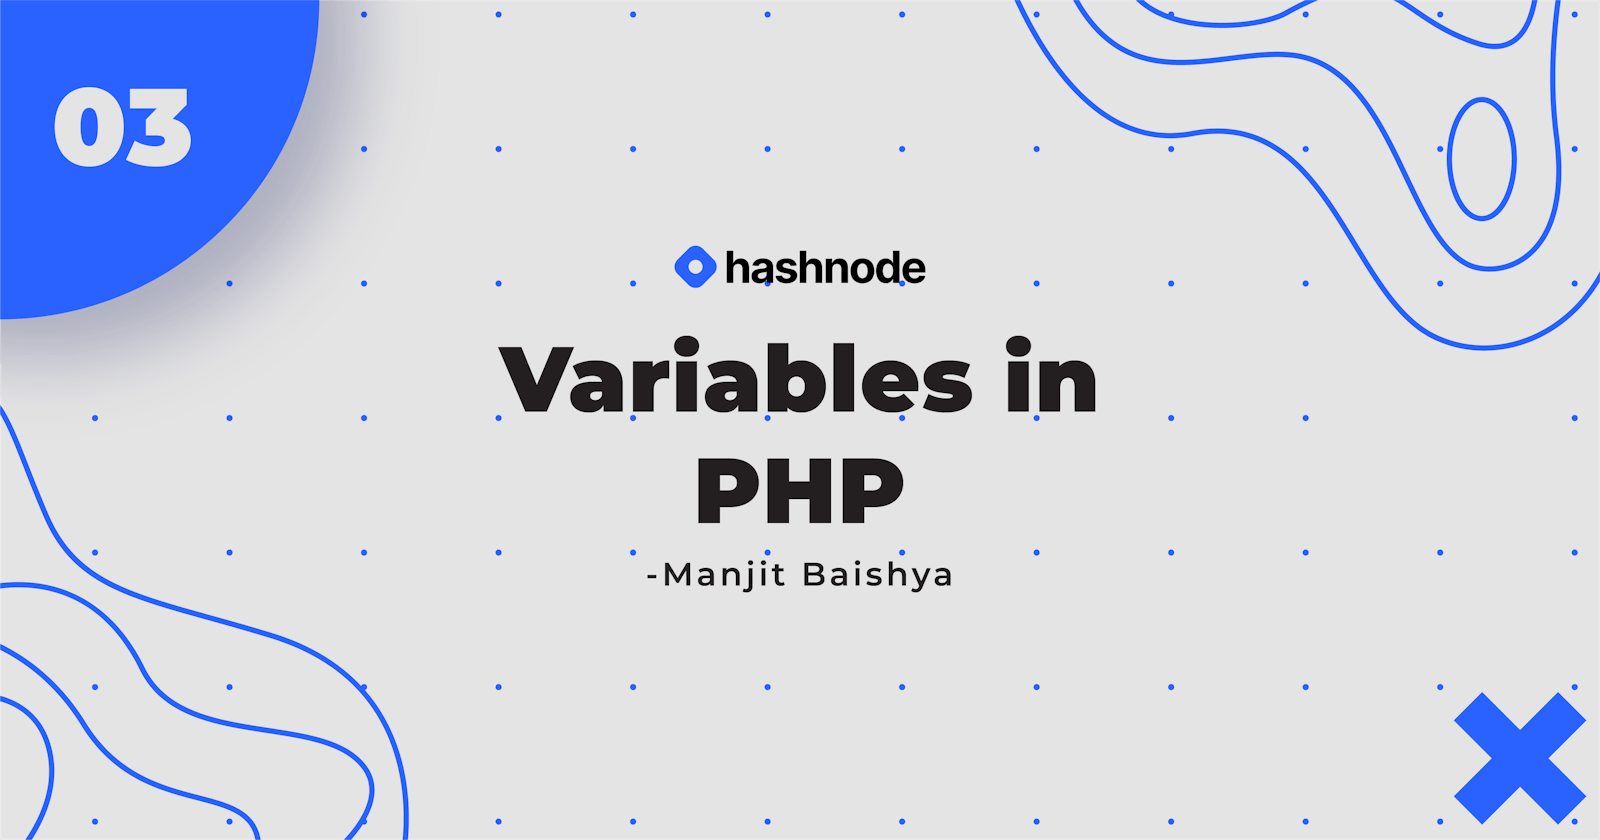 Day 3: Variables in PHP